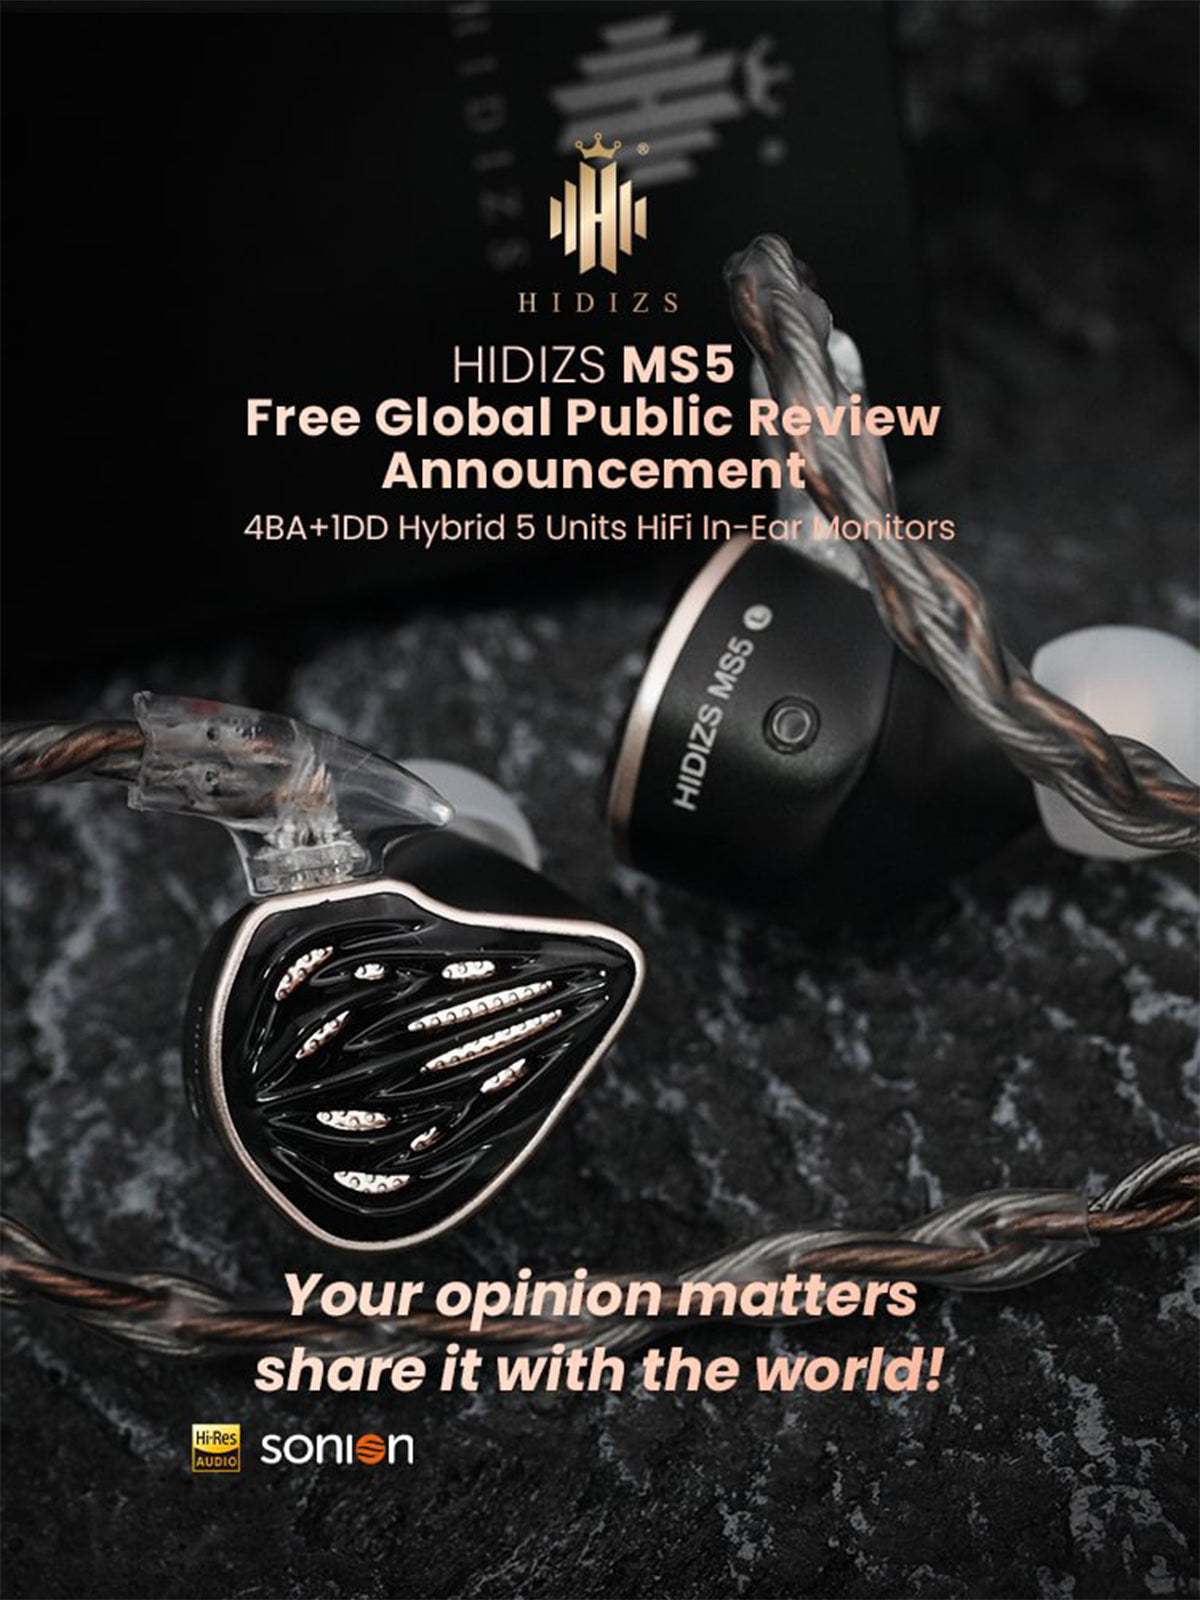 HIDIZS-JOIN_THE_FREE_GLOBAL_PUBLIC_REVIEW_OF_HIDIZS_MS5-M-23031502